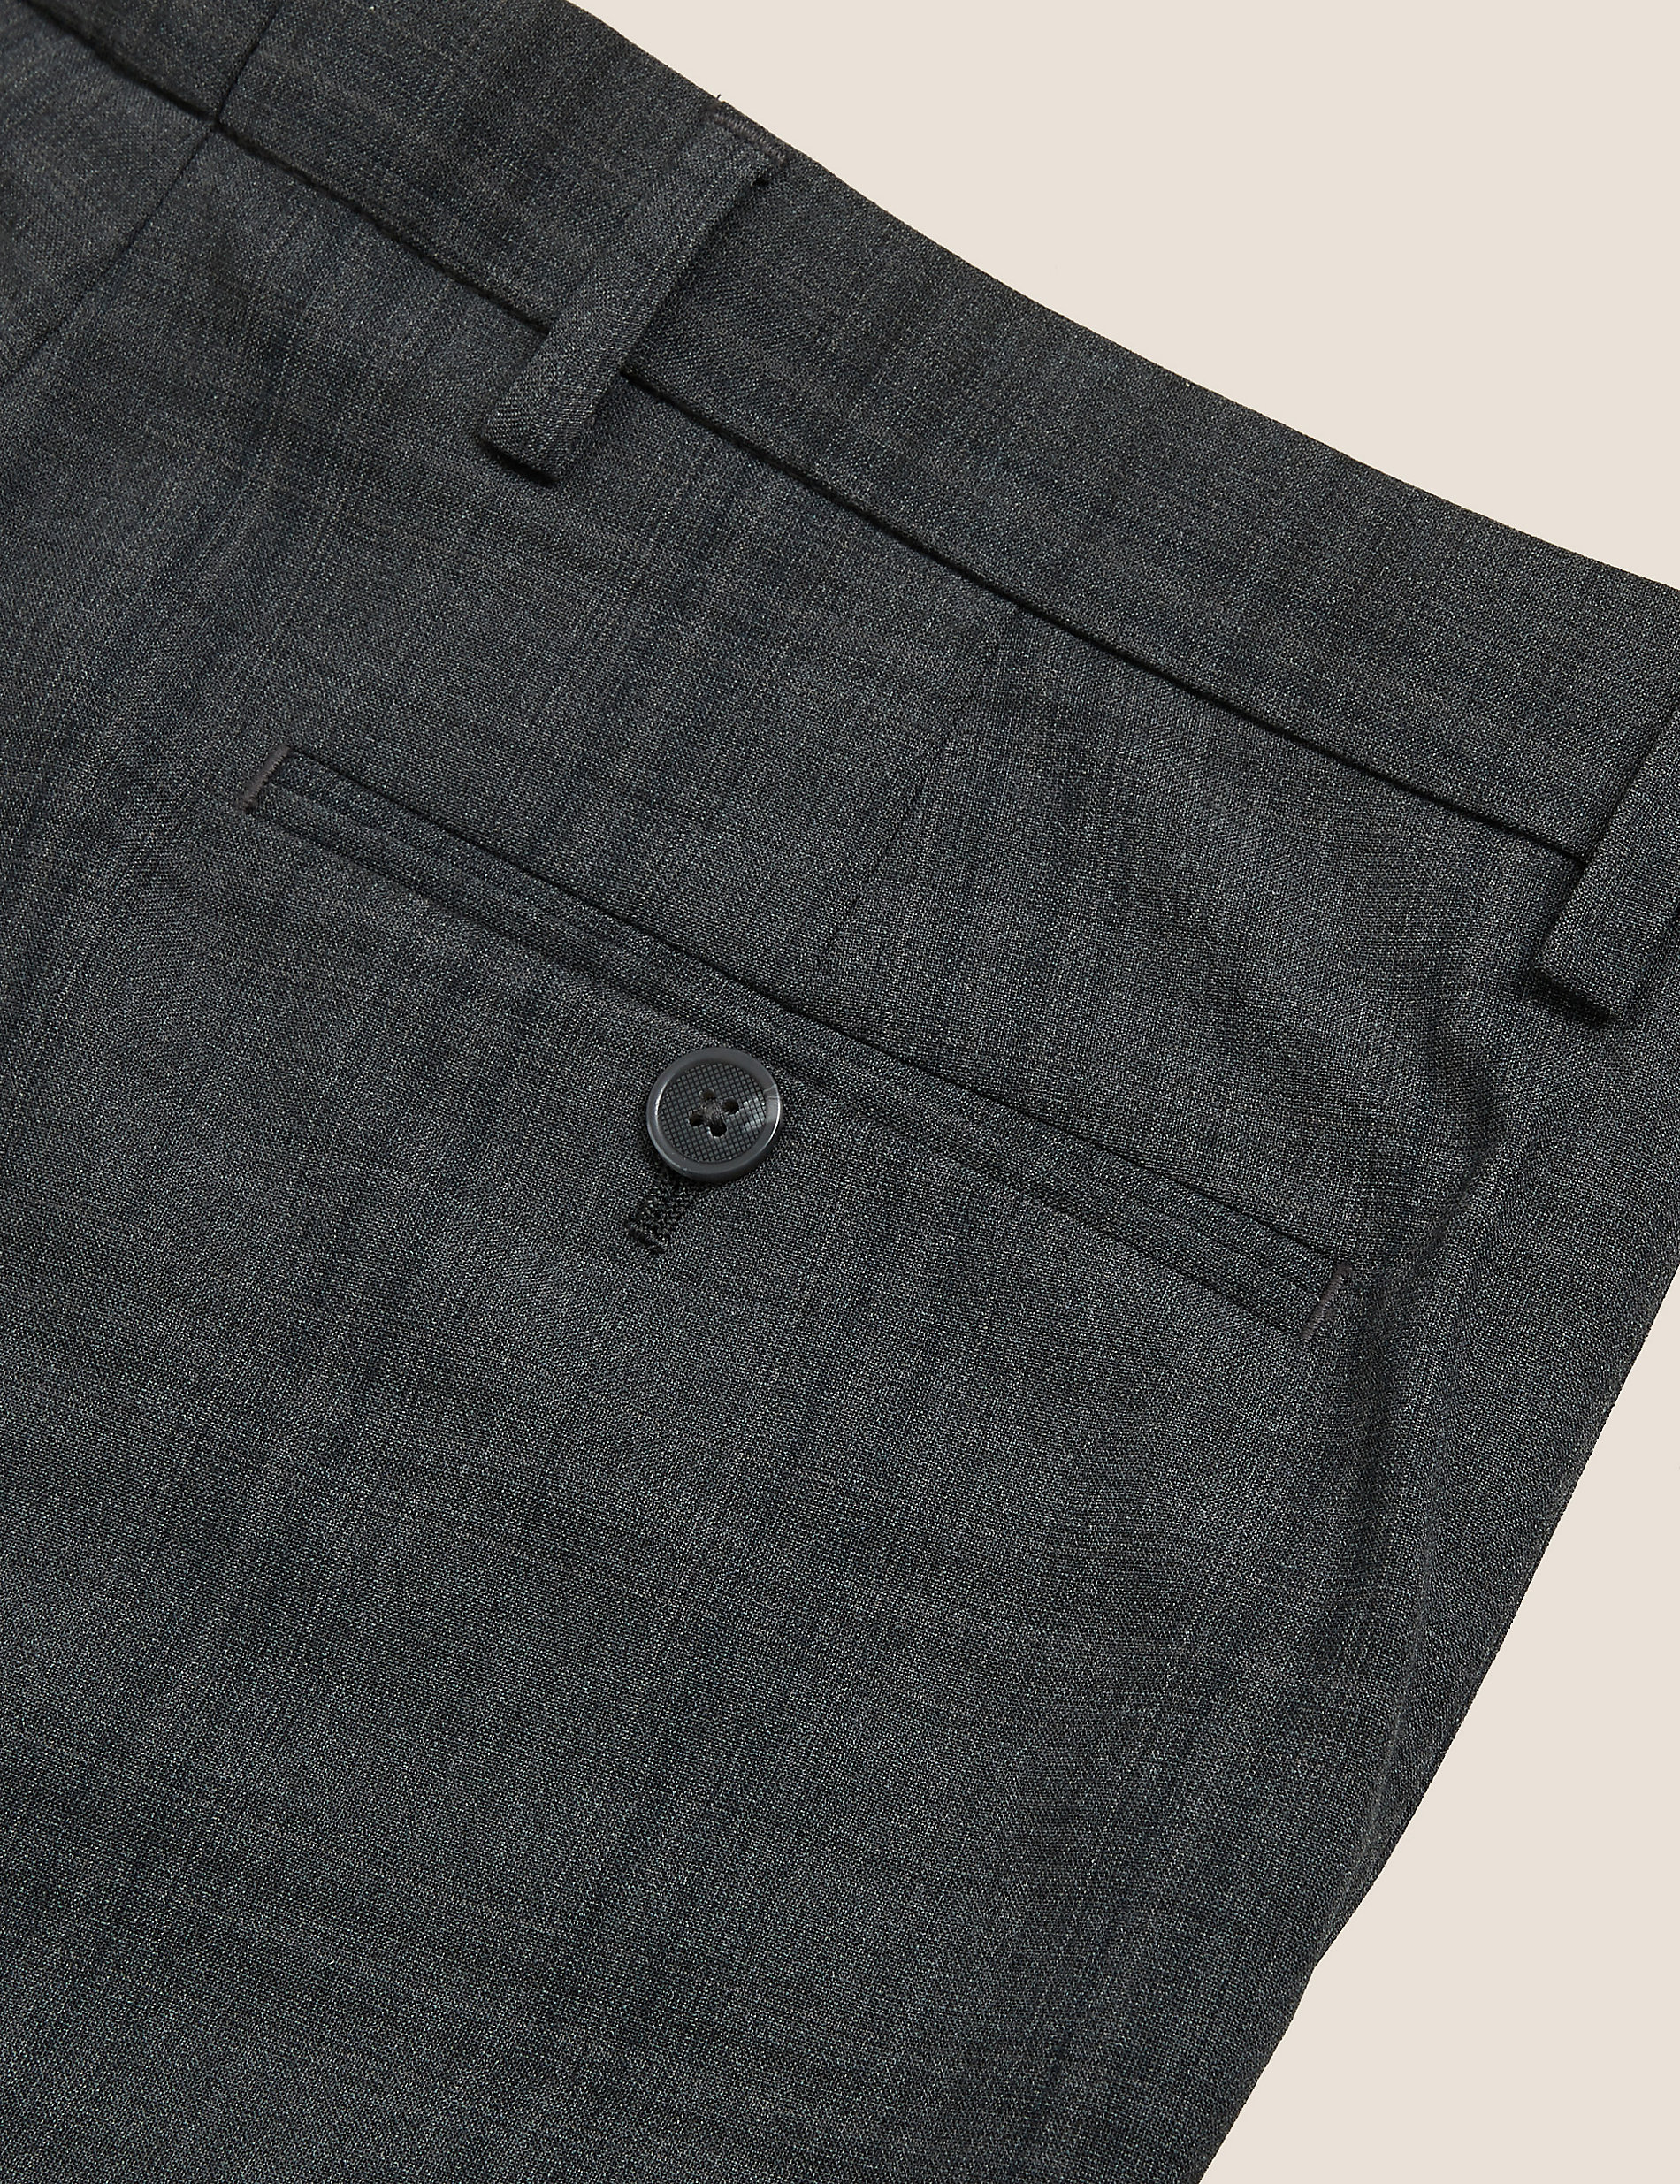 Charcoal Tailored Fit Wool Blend Check Trousers